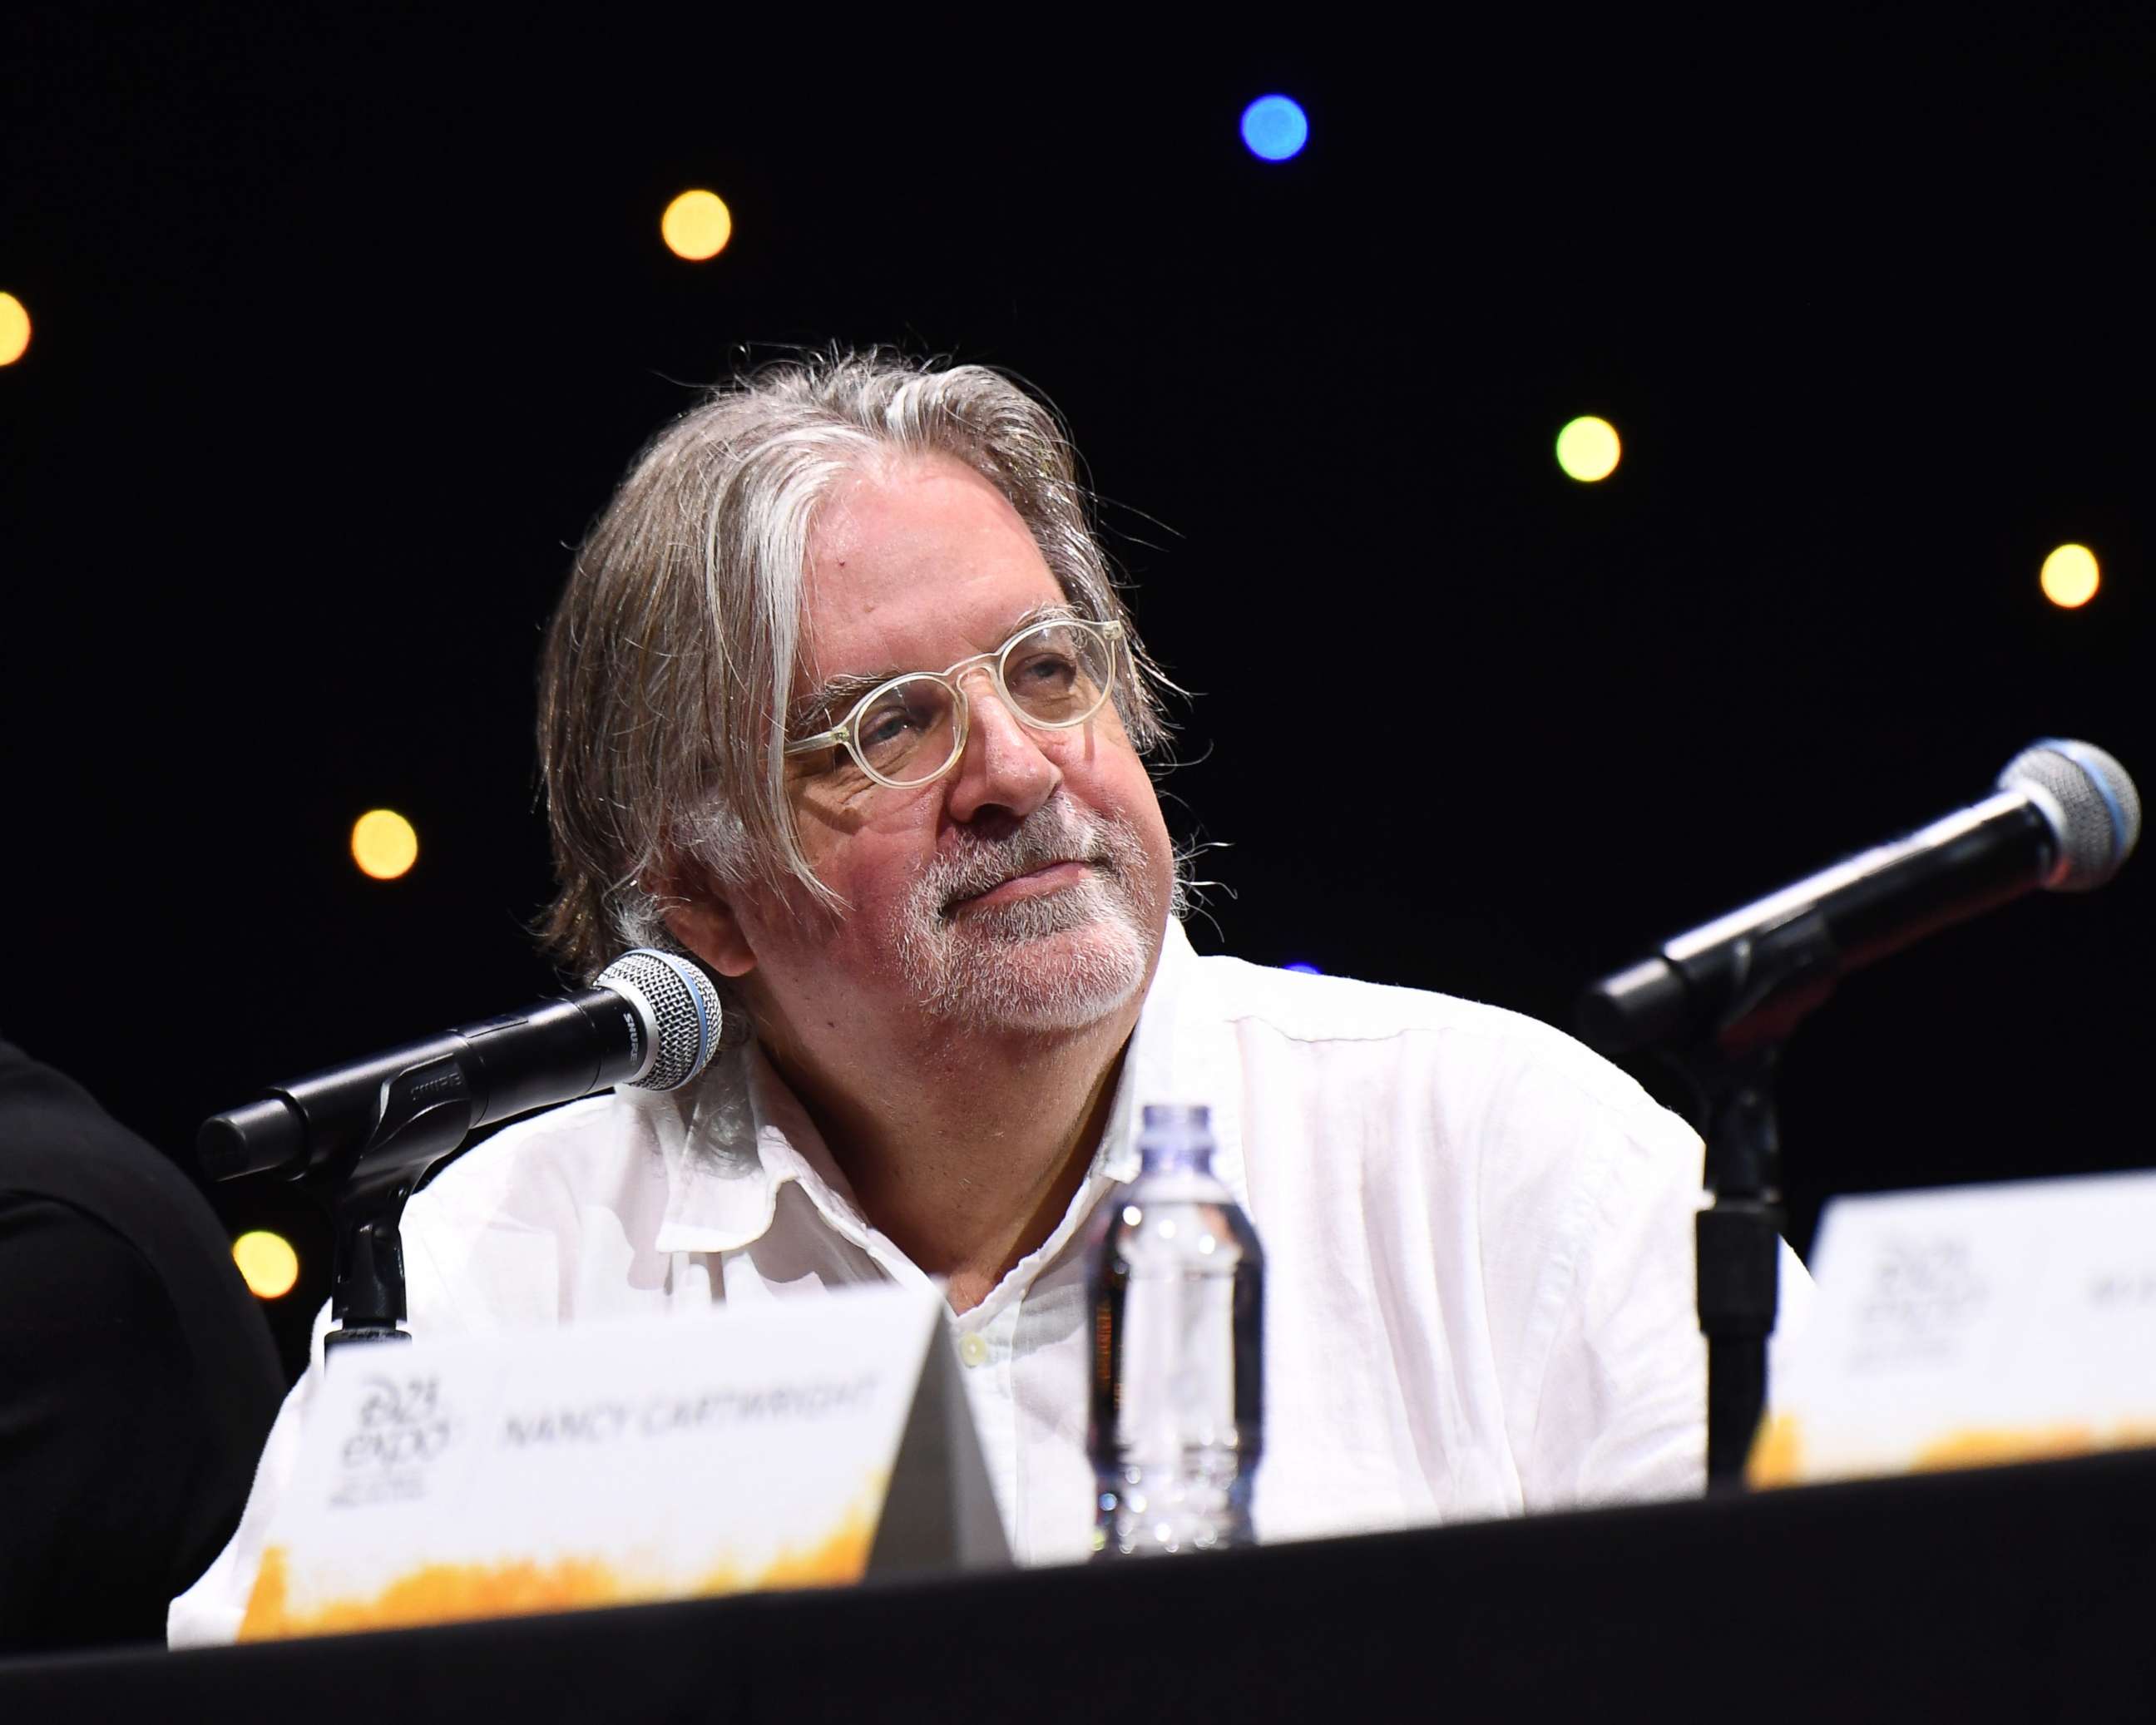 PHOTO: Matt Groening at The Ultimate Disney Fan Event at the Anaheim Convention Center in Anaheim, Calif., Aug. 24, 2019.